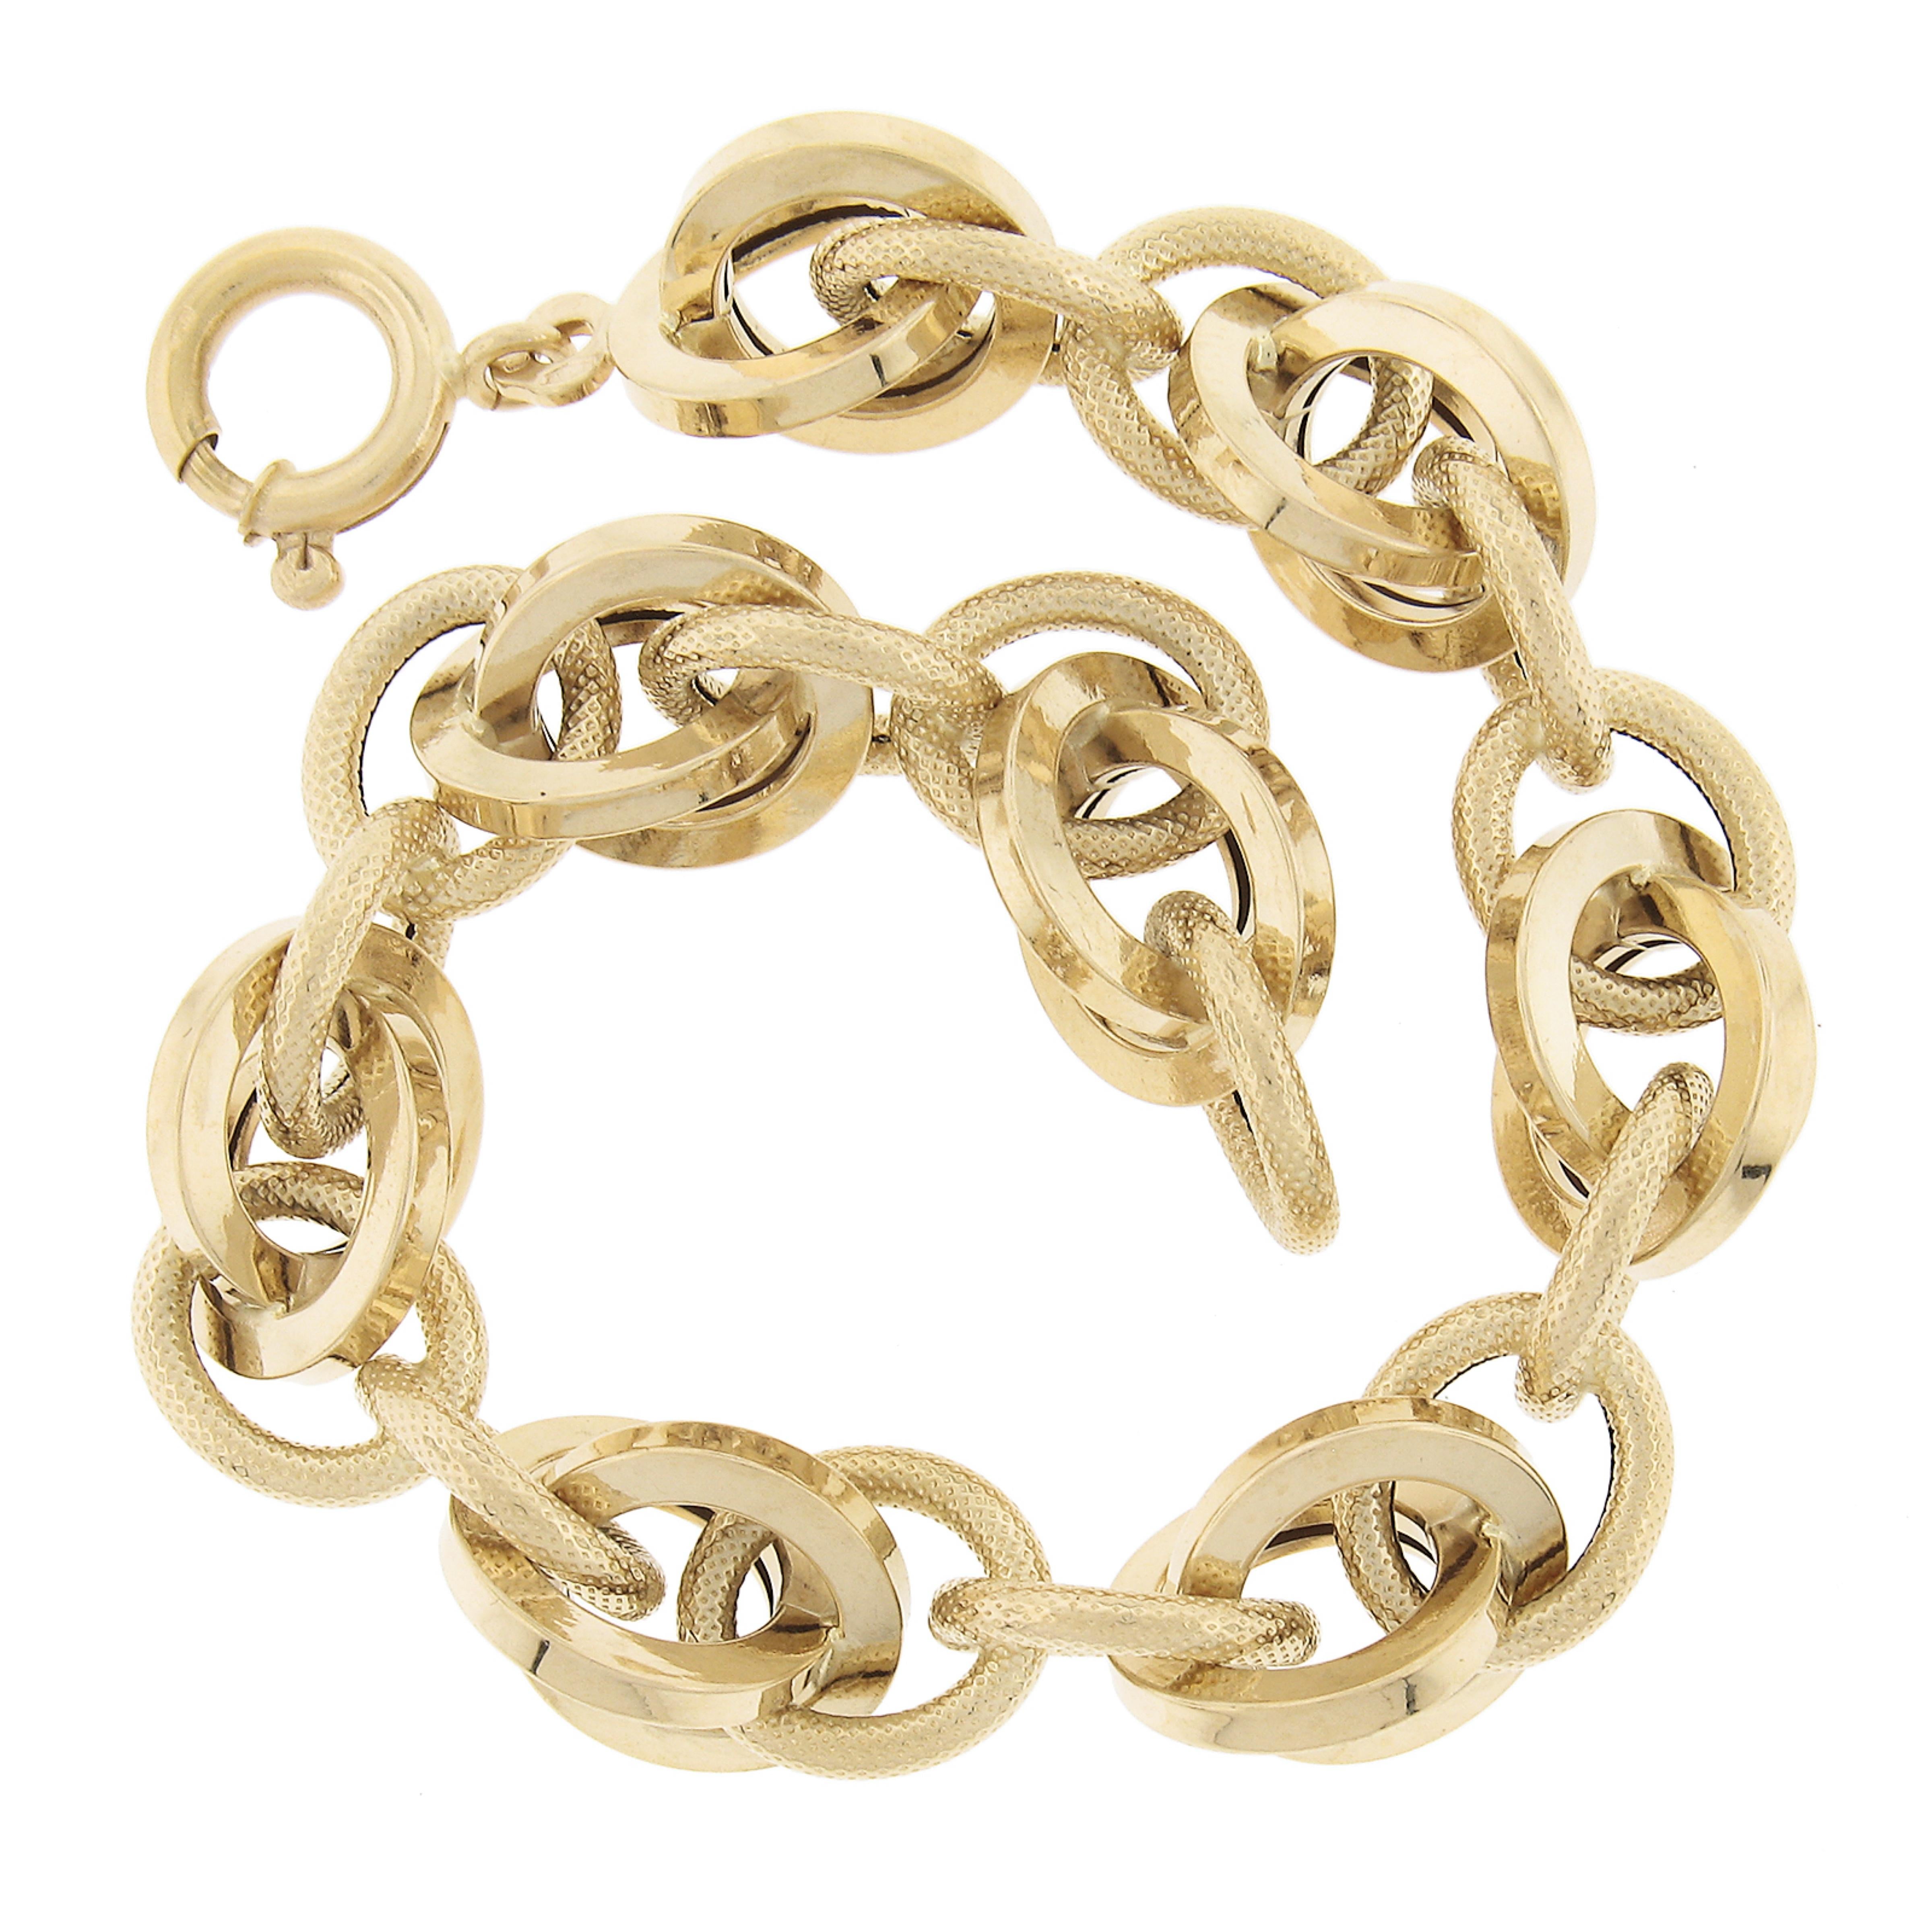 UNOEARRE 18k Gold Textured & Polished Interlocking Round Link Chain Bracelet In Excellent Condition For Sale In Montclair, NJ